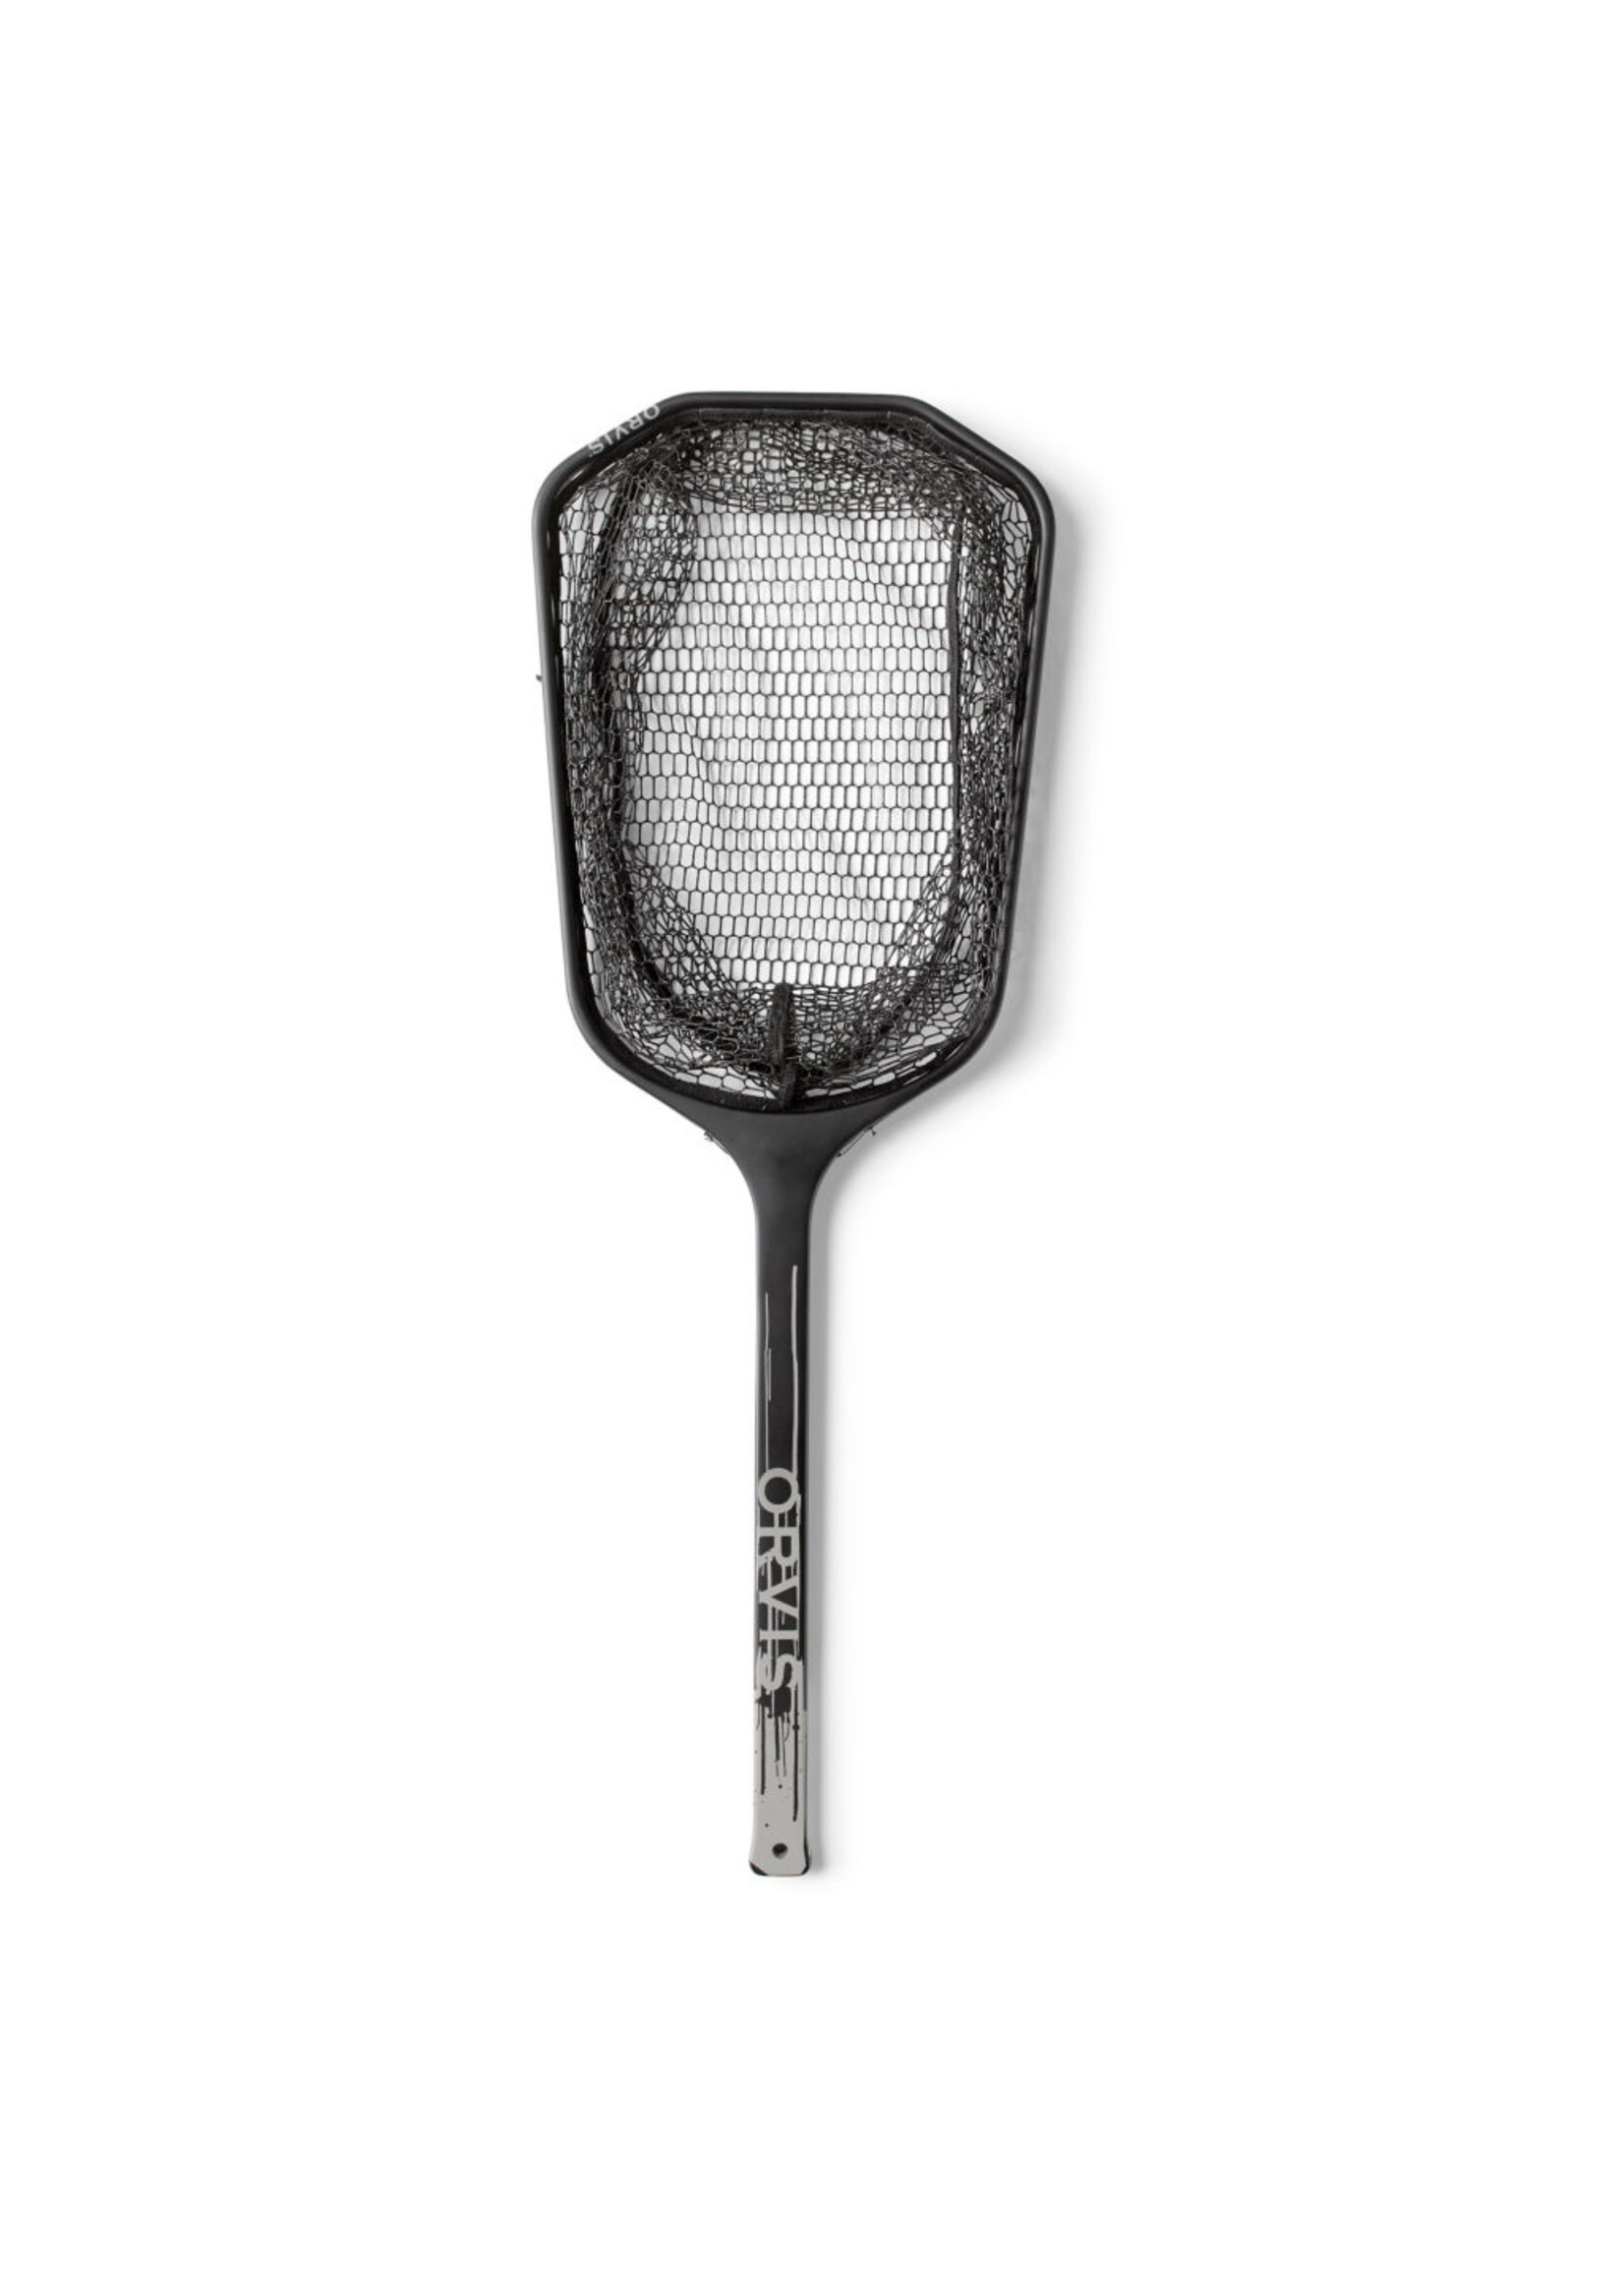 ORVIS WIDE MOUTH GUIDE NET